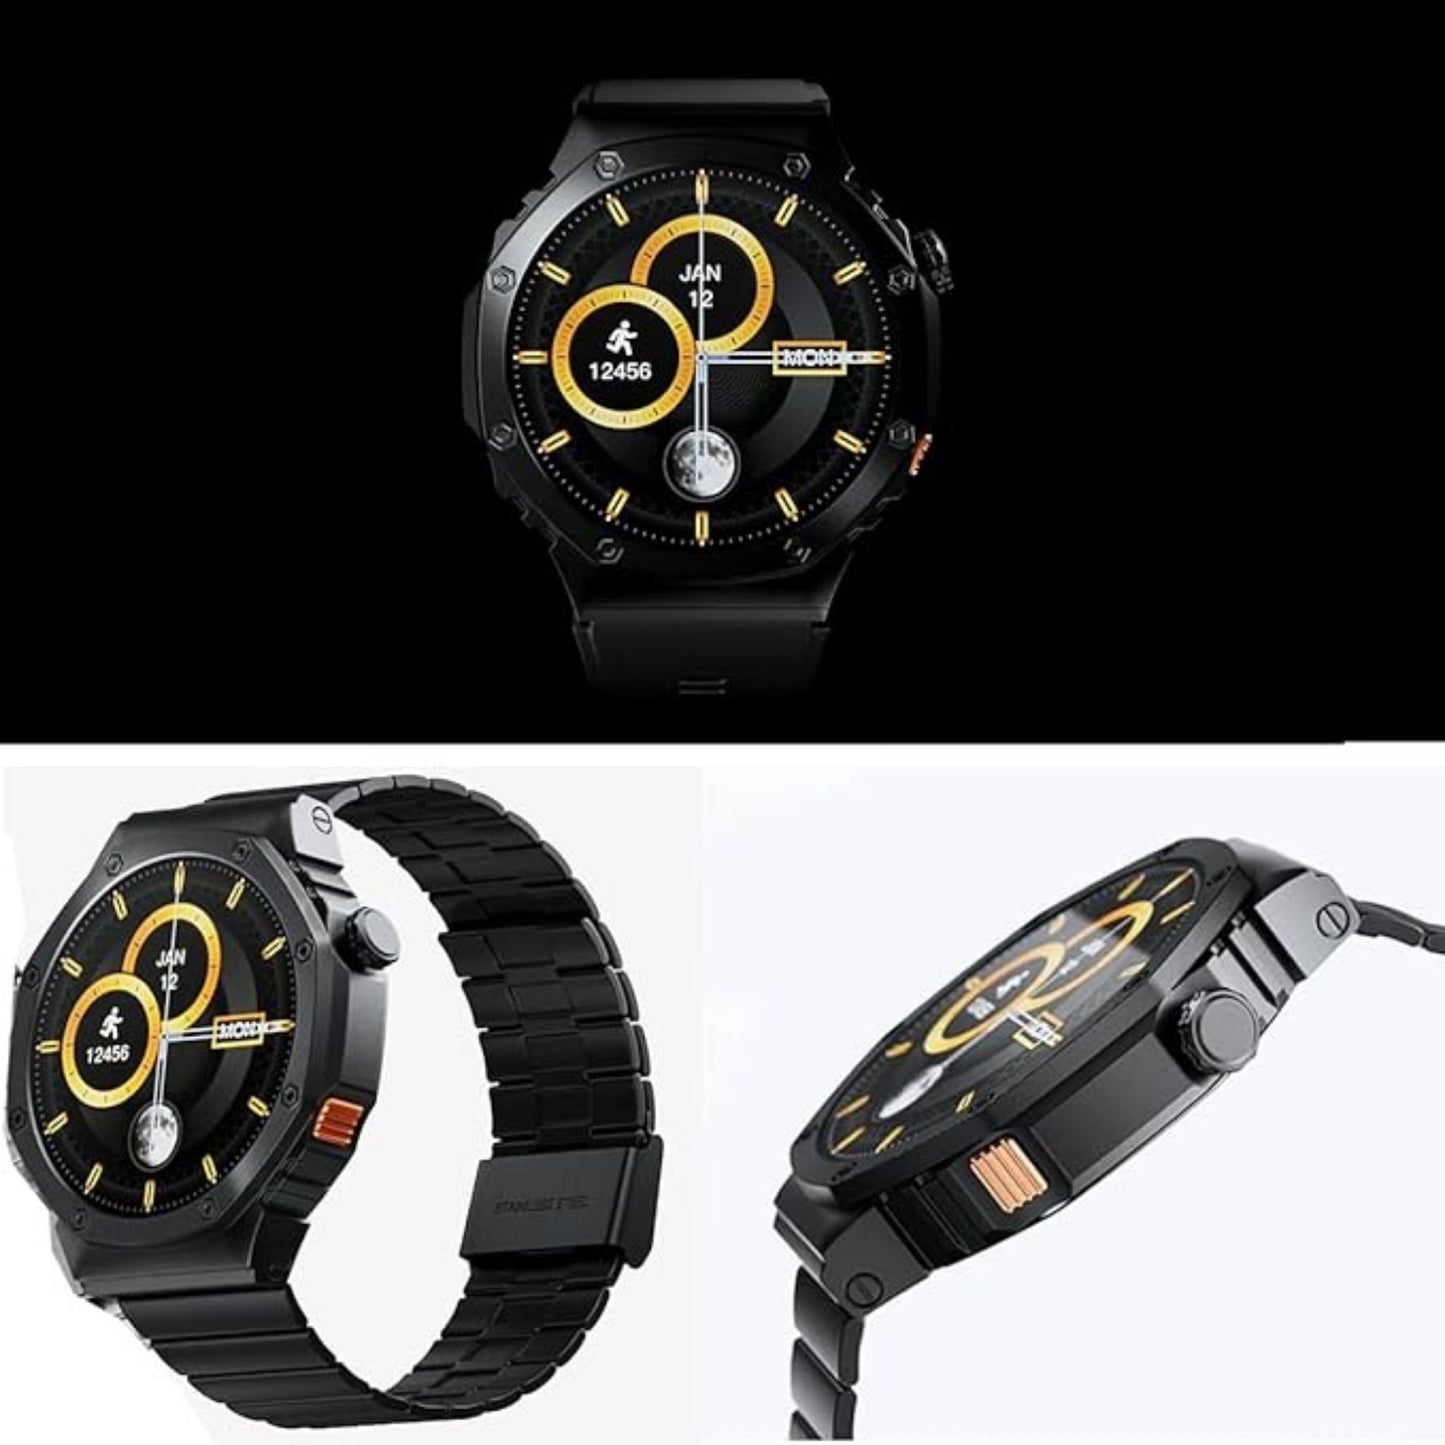 Haino Teko Germany RW41 Round Shape AMOLED Display Smart Watch With 3 Pair Straps and Wireless Charger For Men's and Boys Black